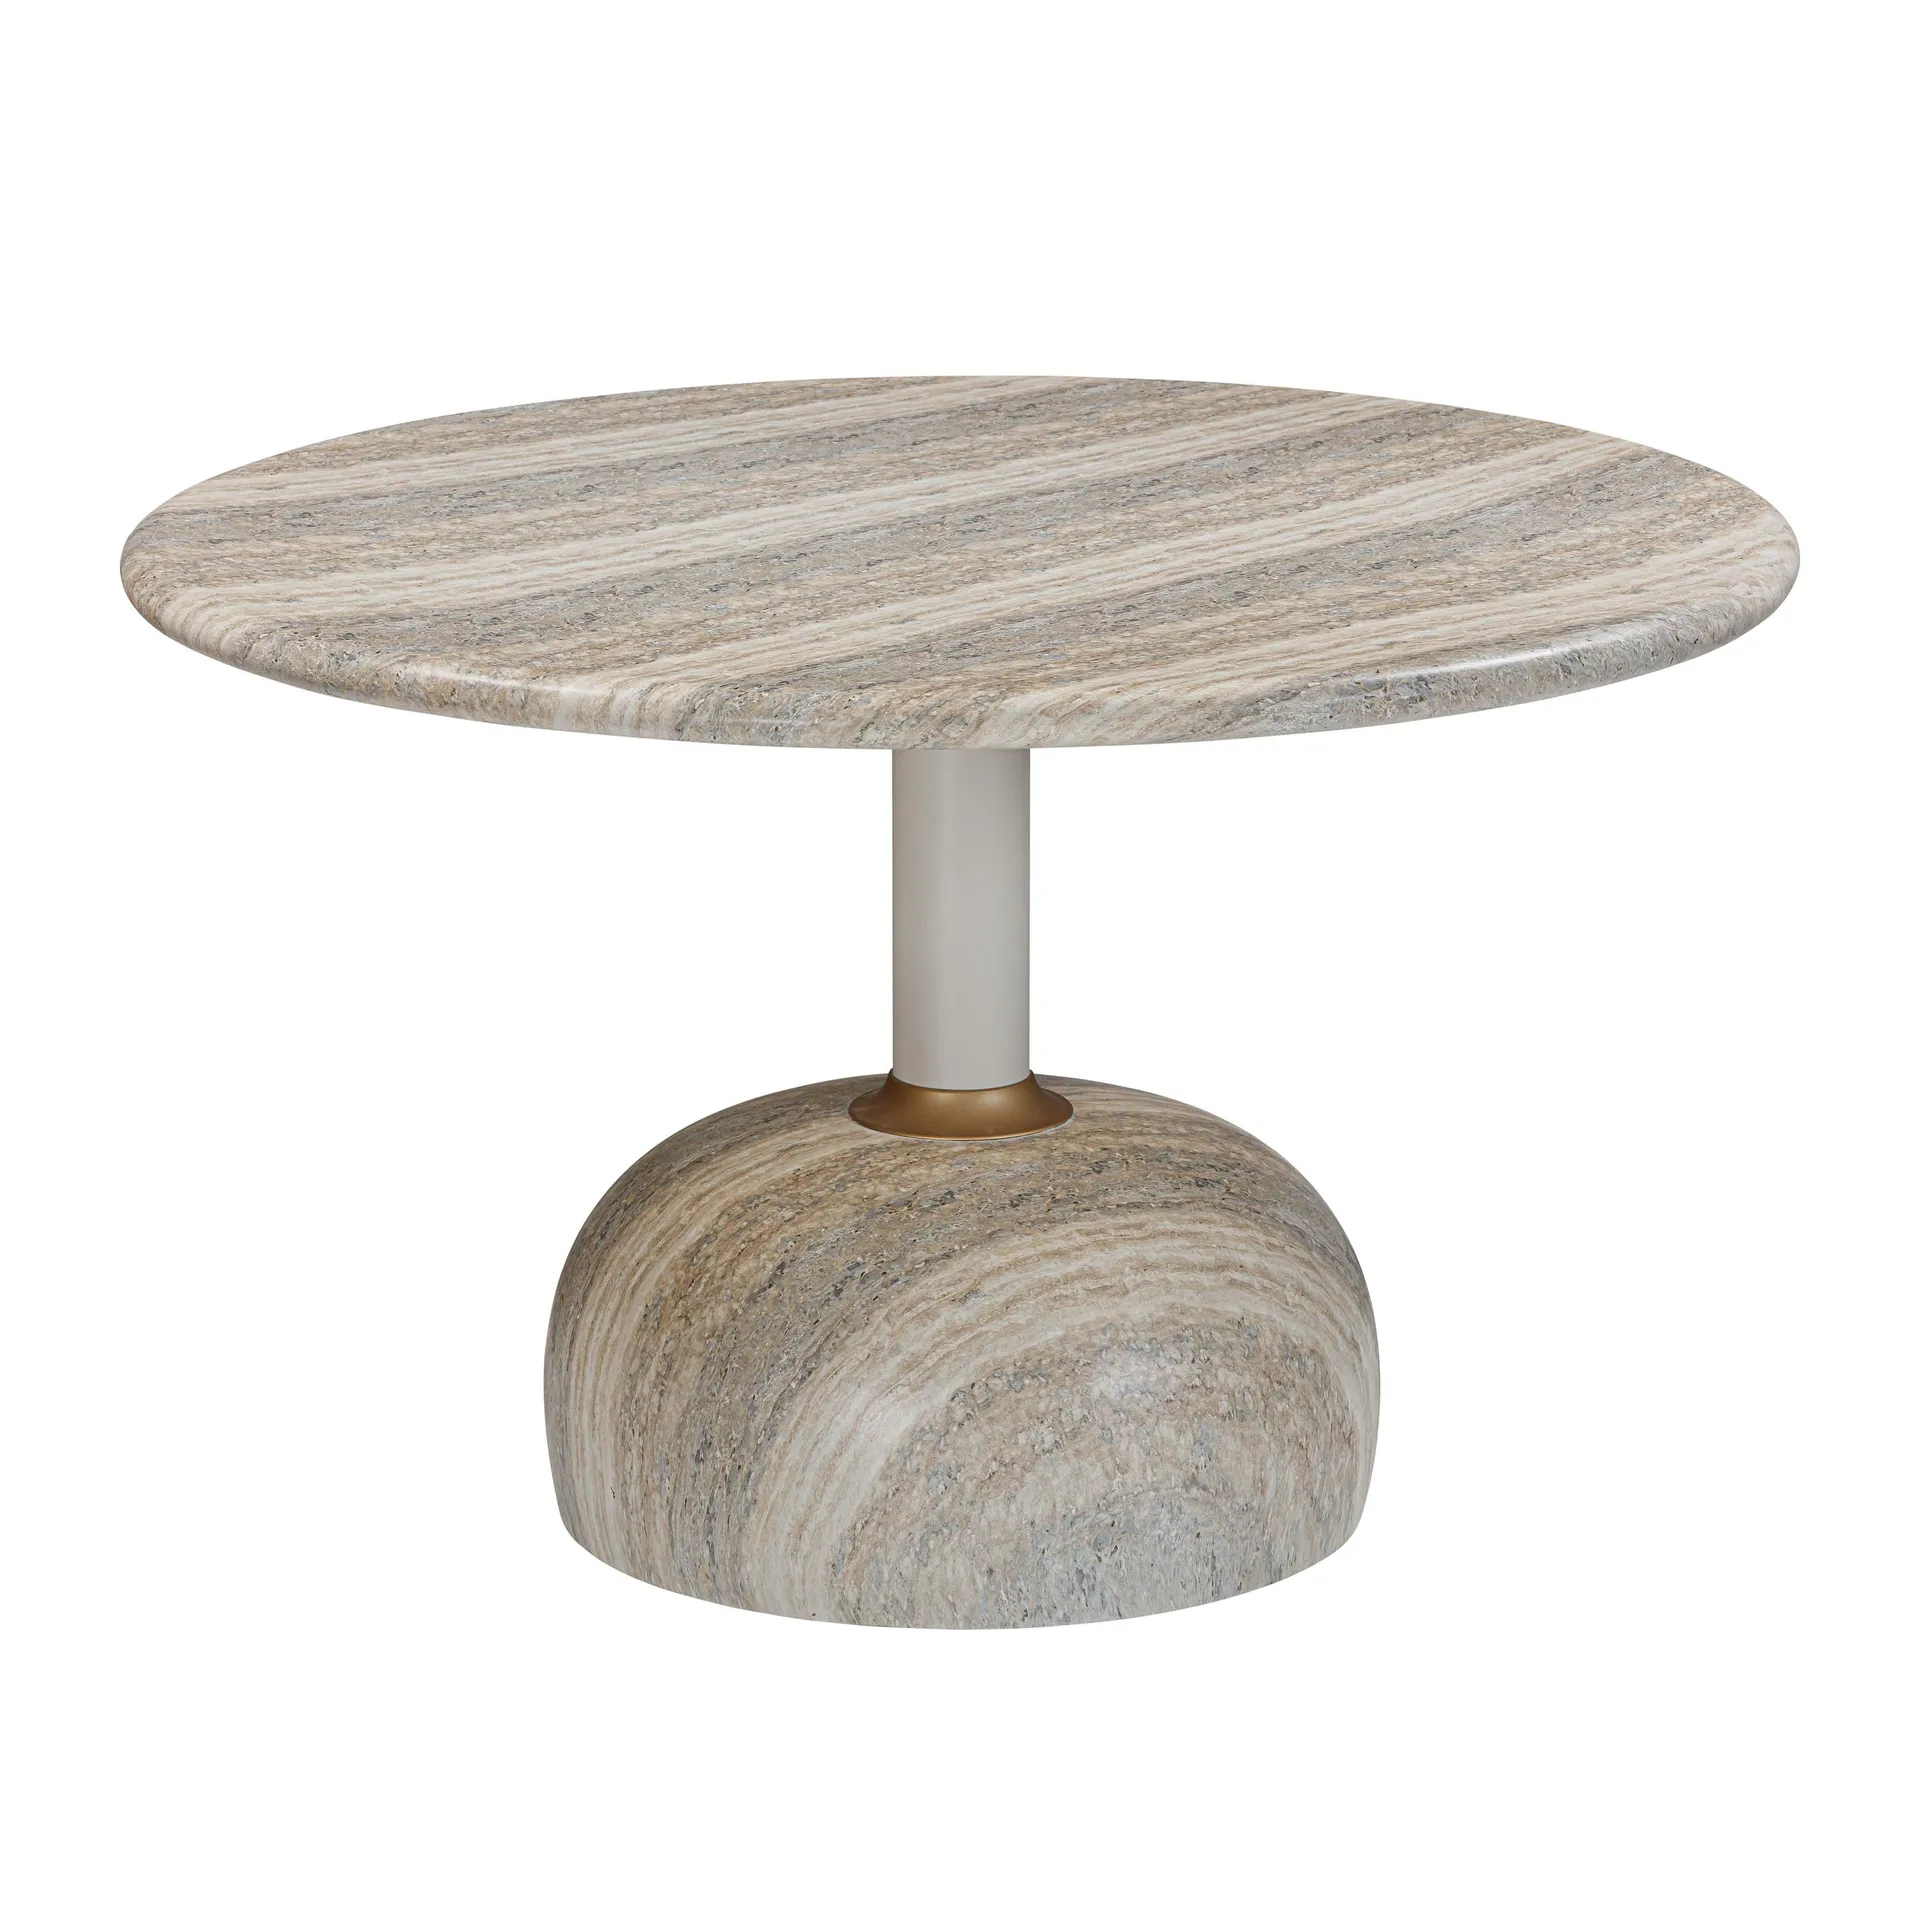 Omaha Concrete Faux Travertine Indoor / Outdoor 48" Round Dining Table